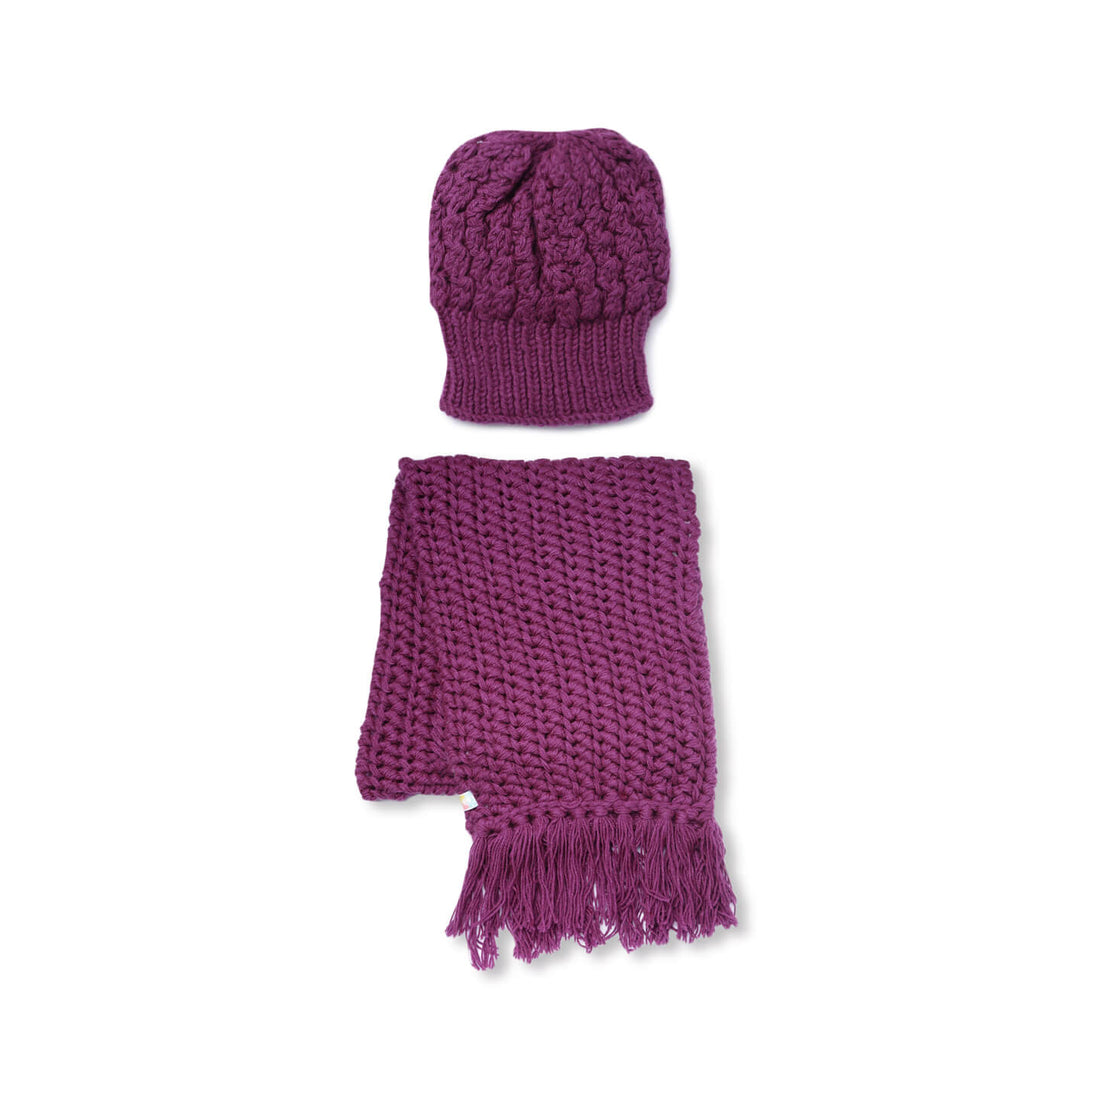 Beanie and Scarf Coordinating Set - 3185